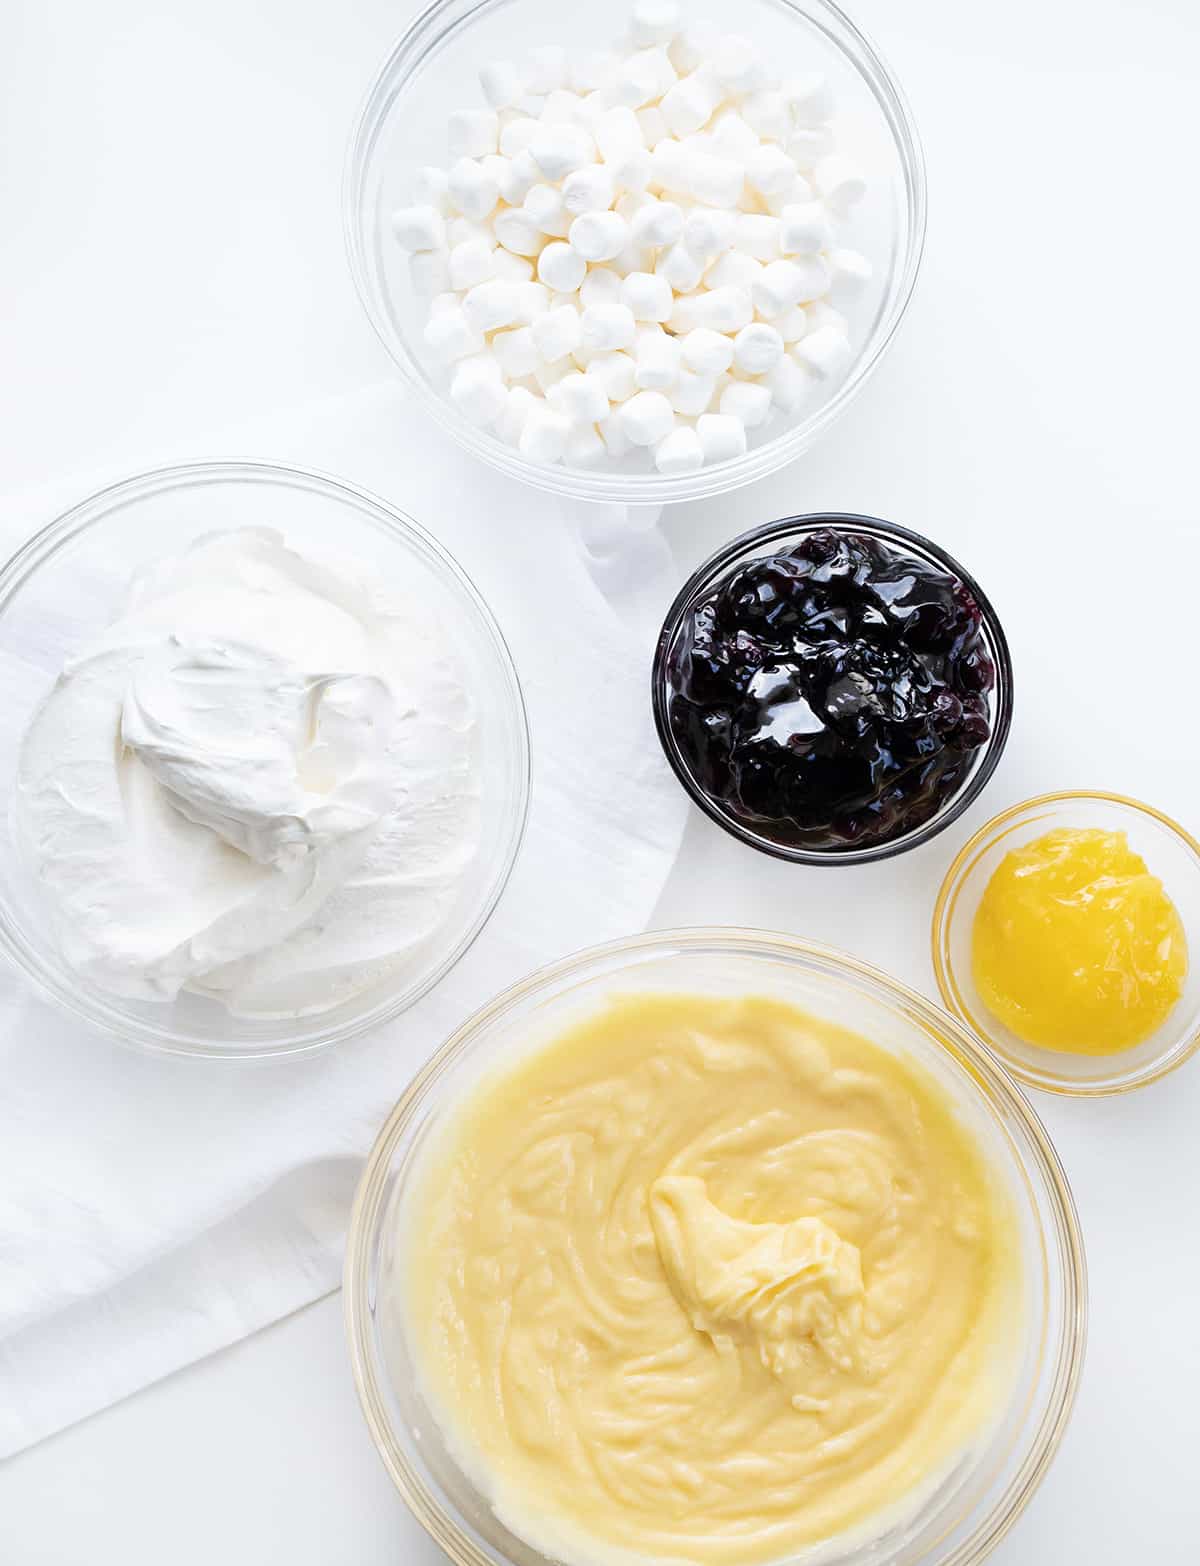 Ingredients to Make Blueberry Lemon Fluff in Glass Bowls.